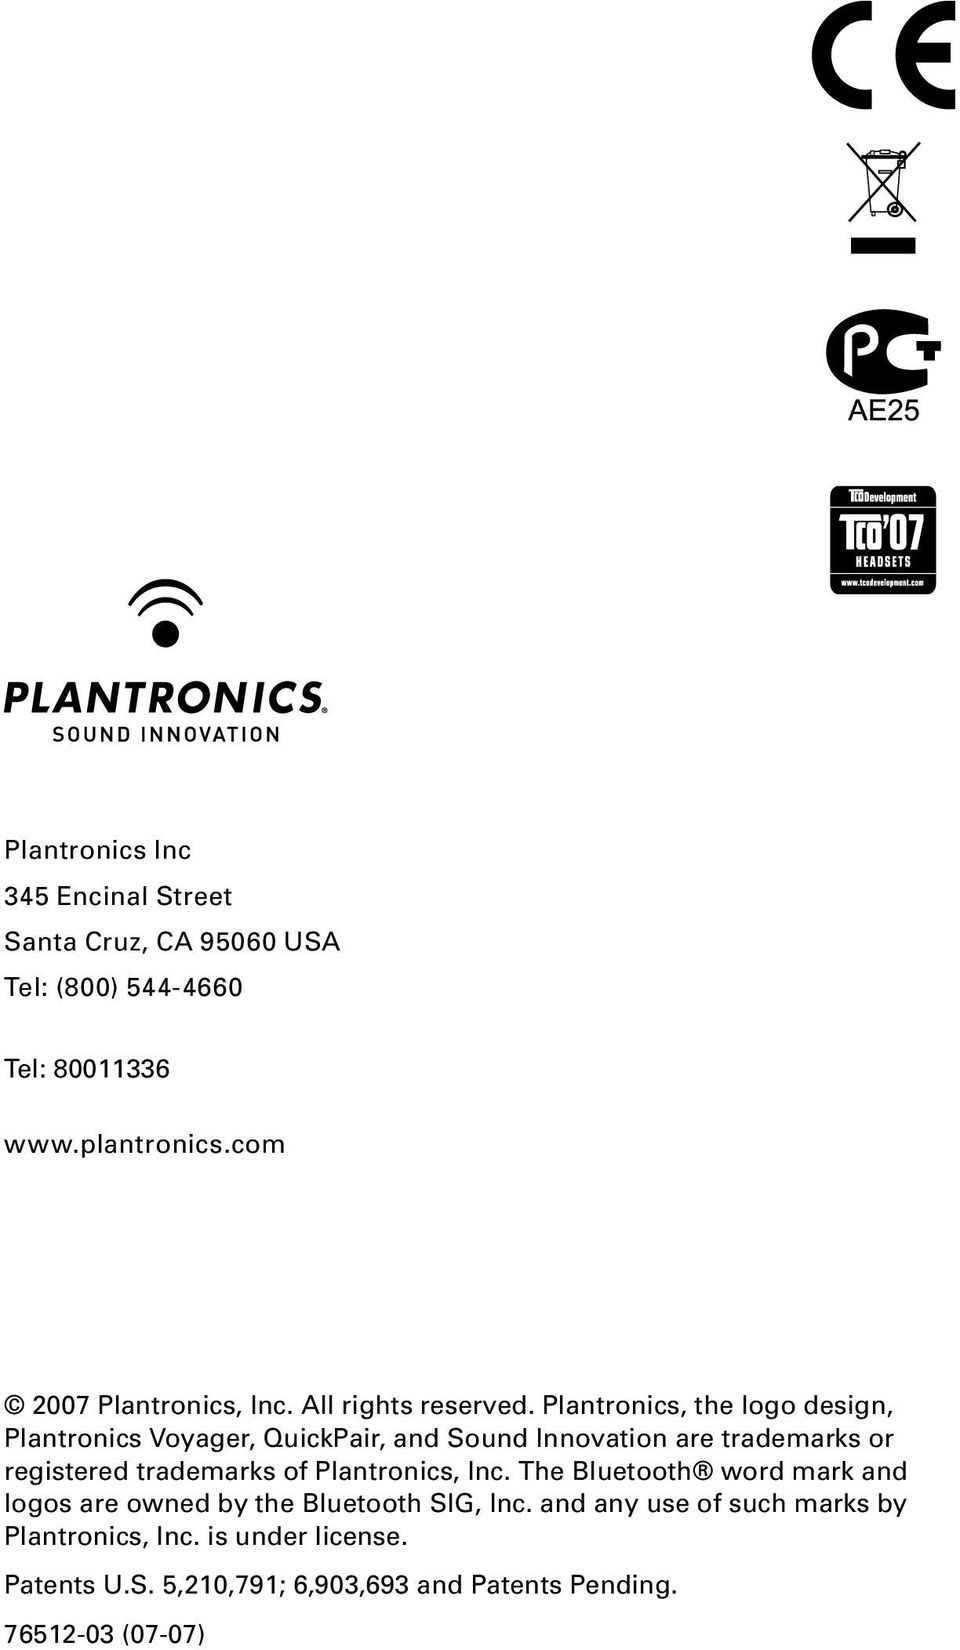 trademarks or registered trademarks of Plantronics, Inc The Bluetooth word mark and logos are owned by the Bluetooth SIG,